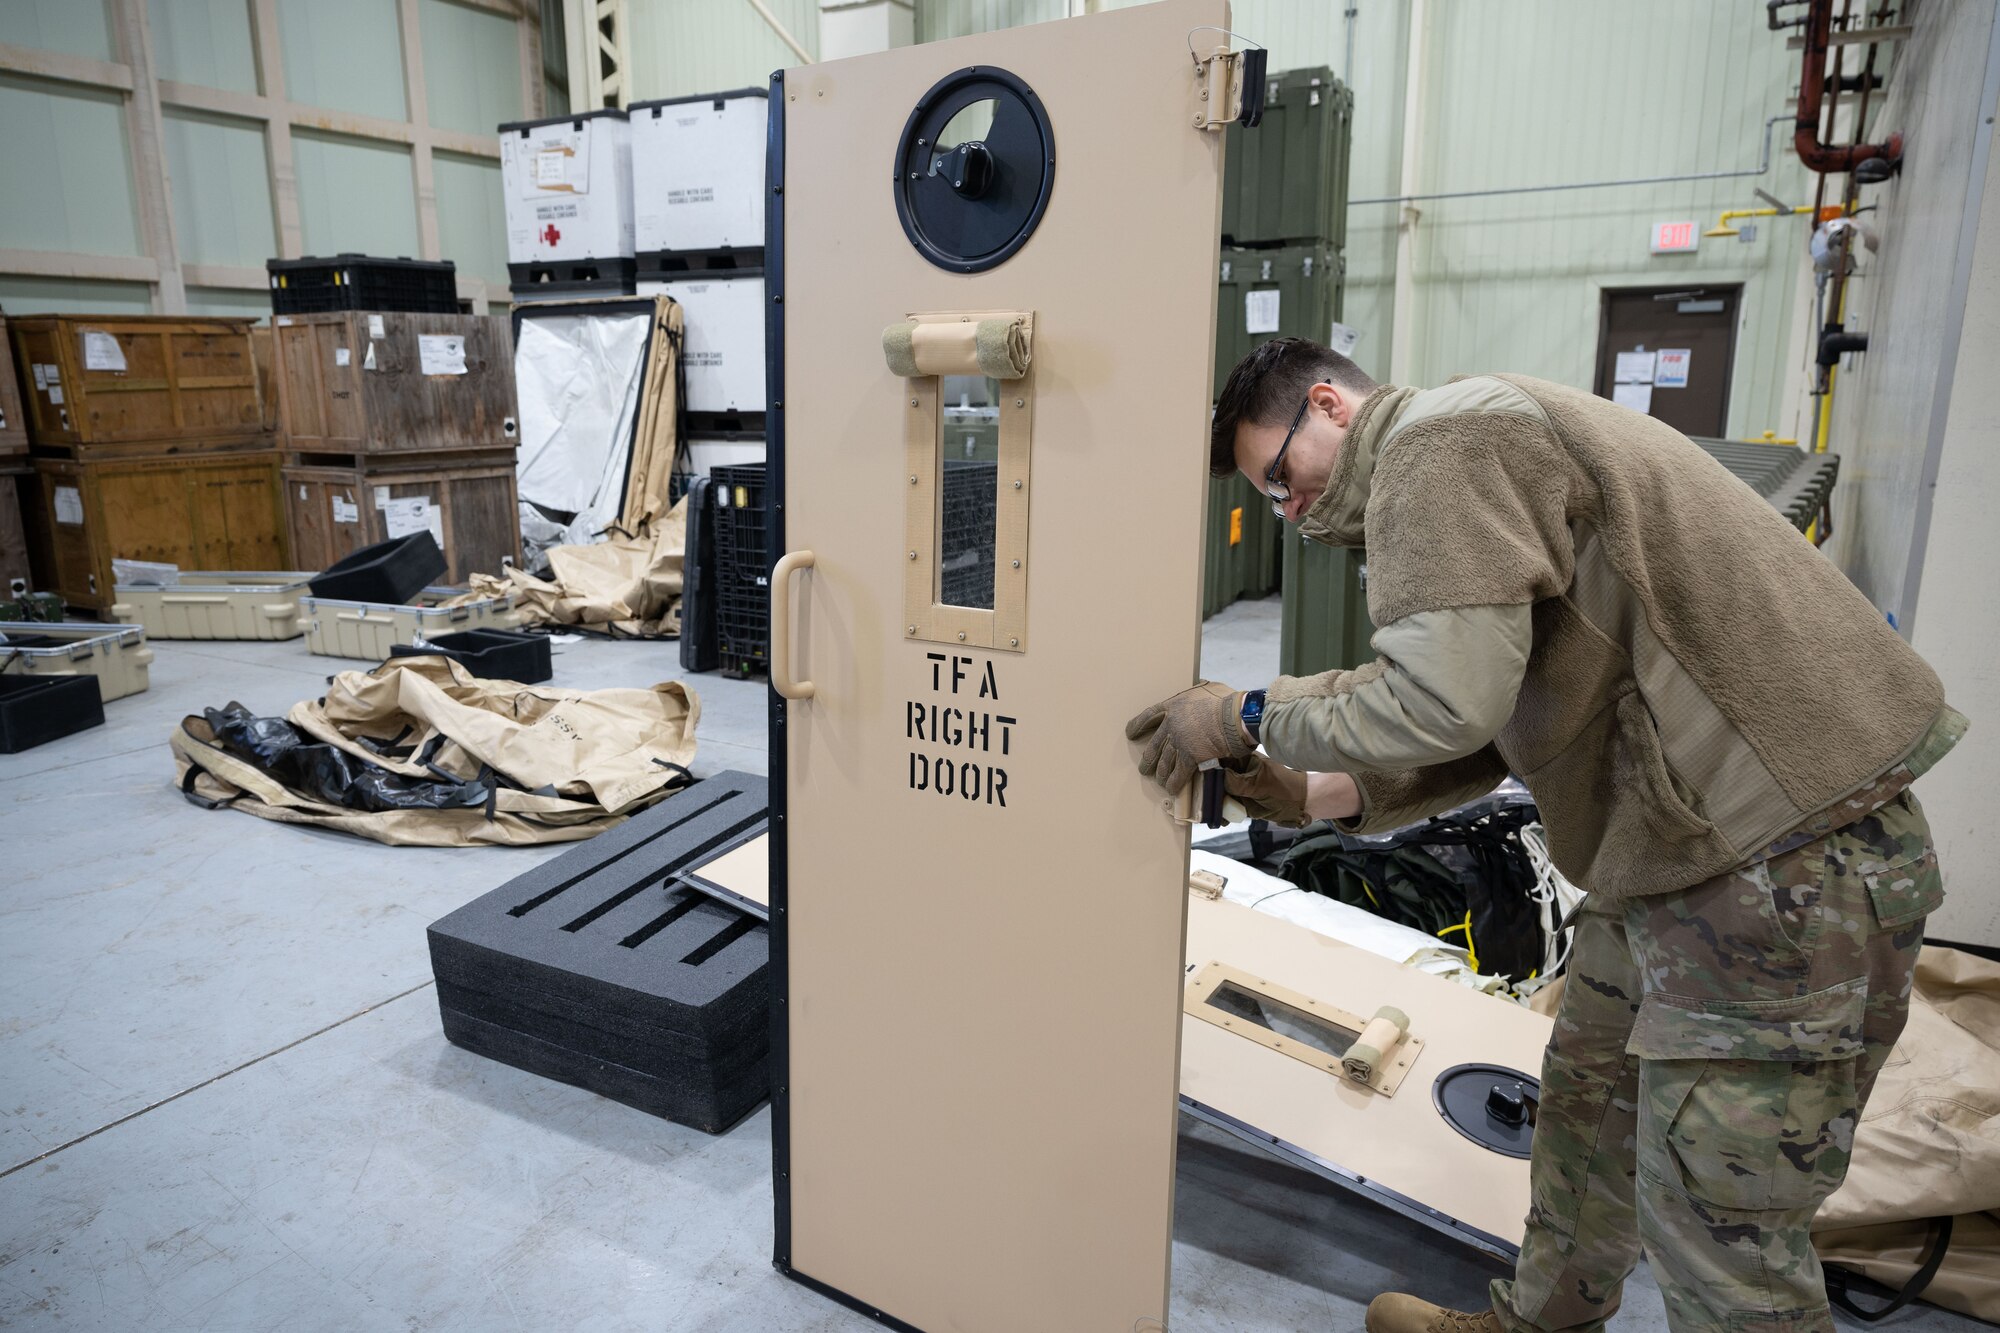 Staff Sgt. Nick Kozak, 8th Healthcare Operations Squadron NCO in charge of contingency support, adjusts the hinges of a toxic-free area door entrance at Kunsan Air Base, Republic of Korea, Jan. 20, 2023. The tent kit 2 chemical protection system is composed of two rooms—a multi-functional entrance and a toxic-free area. (U.S. Air Force photo by Senior Airman Akeem K. Campbell)